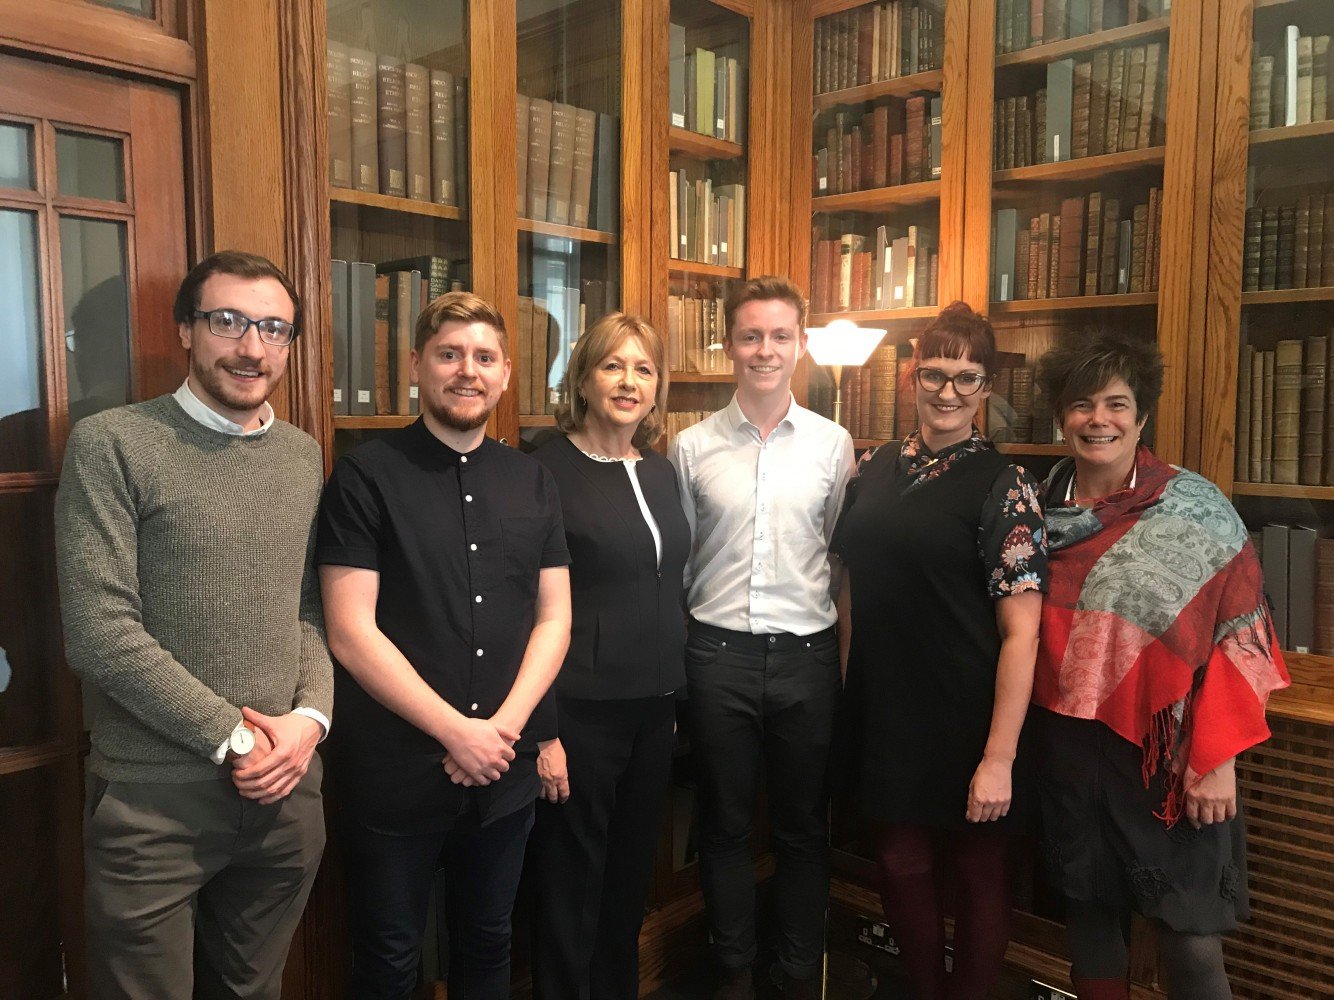 Pictured (l-r): Oisín Hassan, VP Academic Affairs, USI, Simon Lynch, Visual Communication graduate from IADT, Mary McAleese, Patron of the National Forum, Dale Whelehan, TCD, Karolyn McDonnell, IT Carlow and Dr Terry Maguire, Director, National Forum.